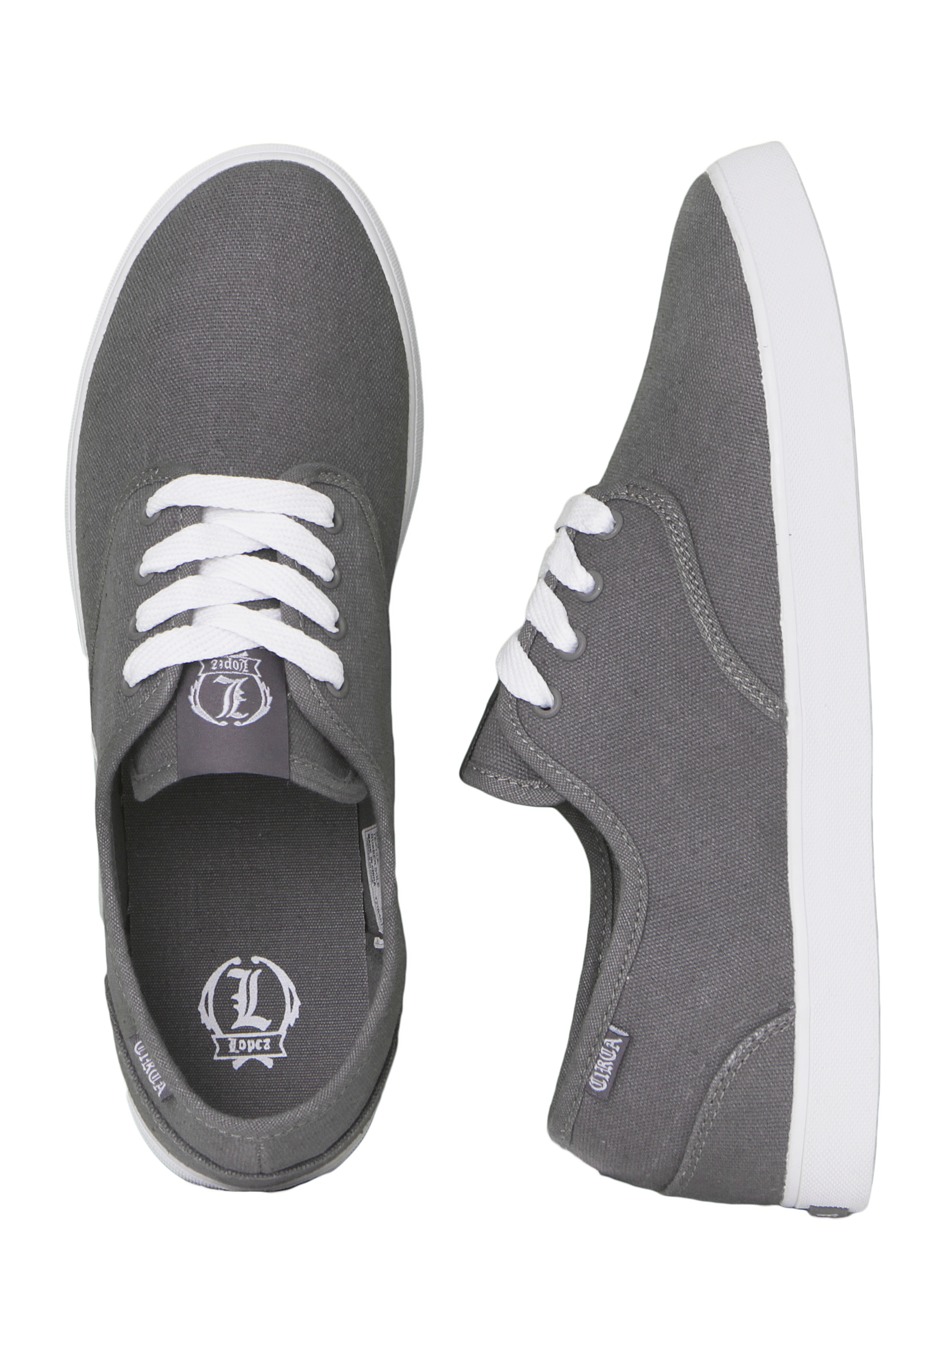 Classy grey shoes